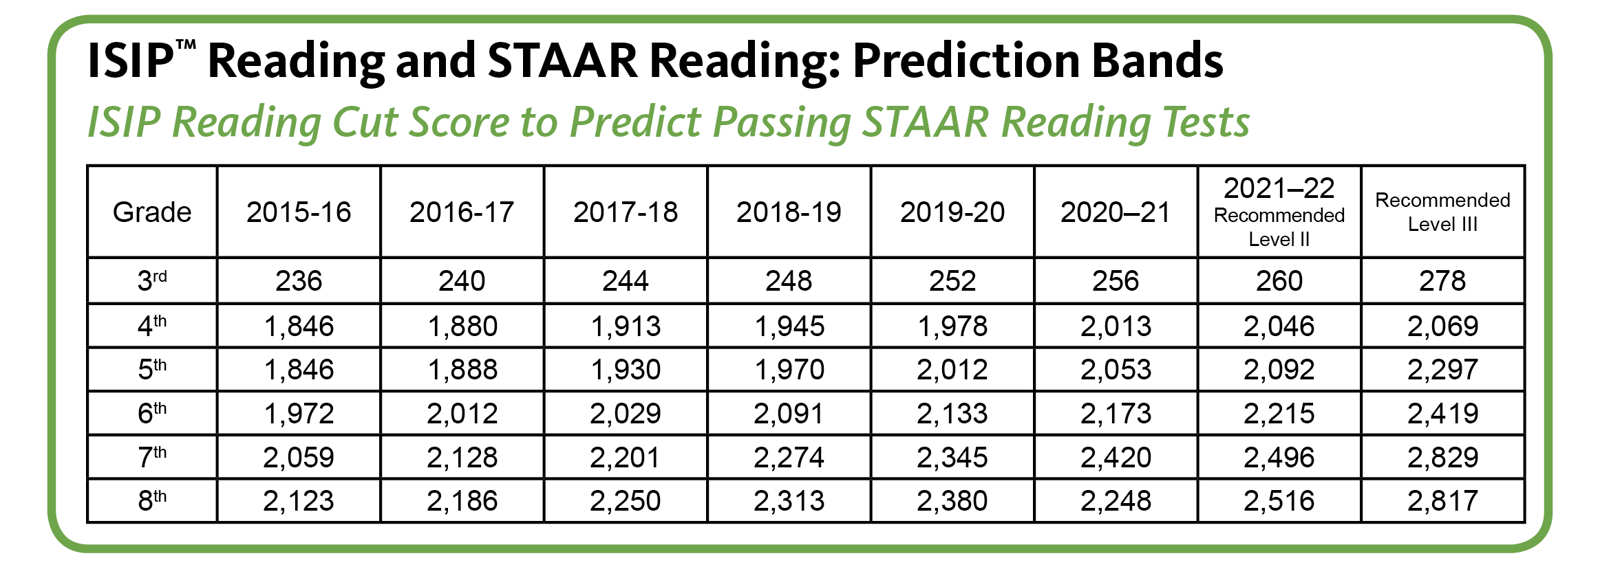 ISIP Assessments Predict Passage of STAAR Test with 95 Confidence